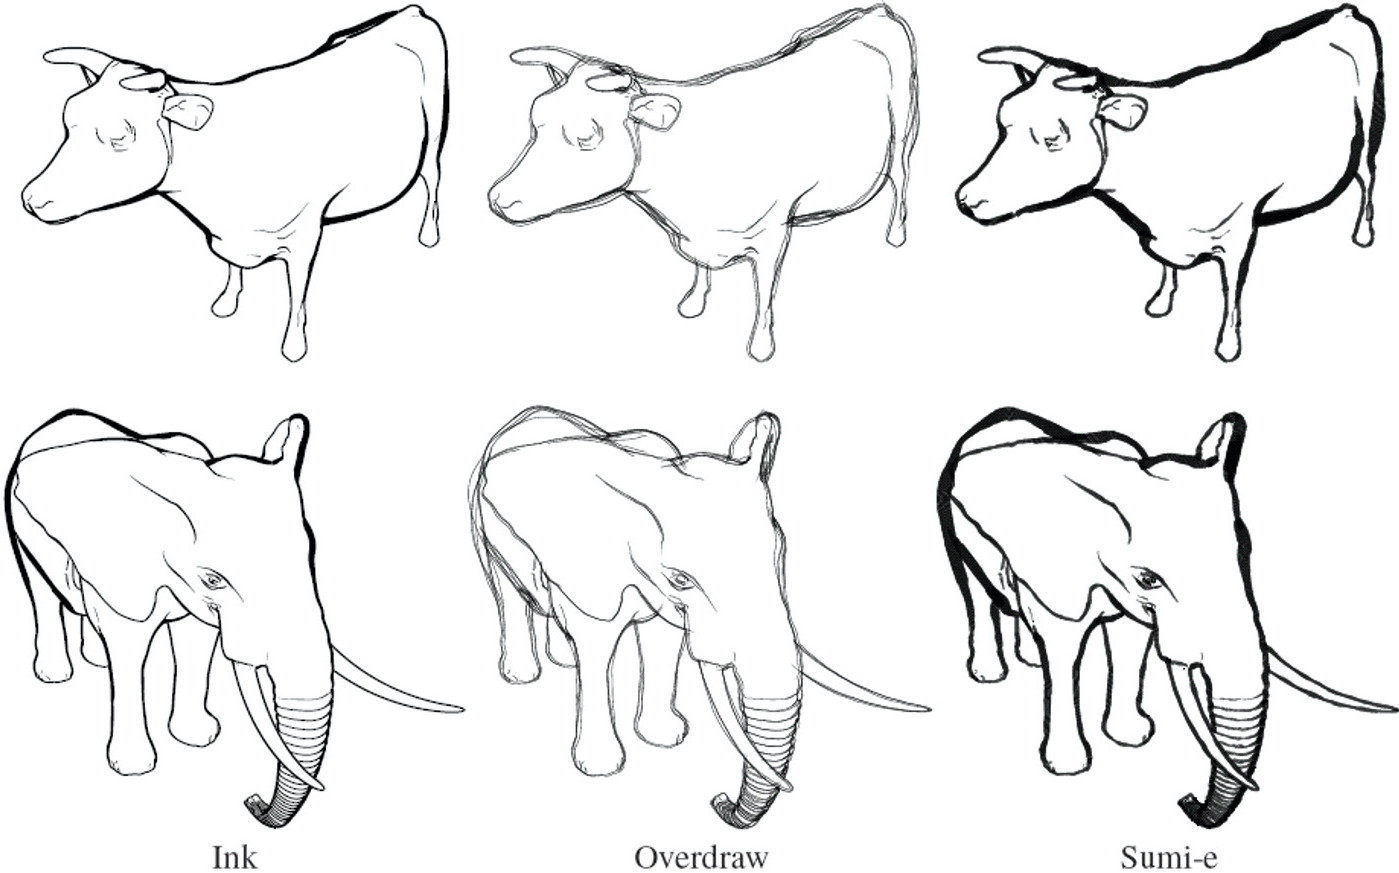 Cow drawn in different styles